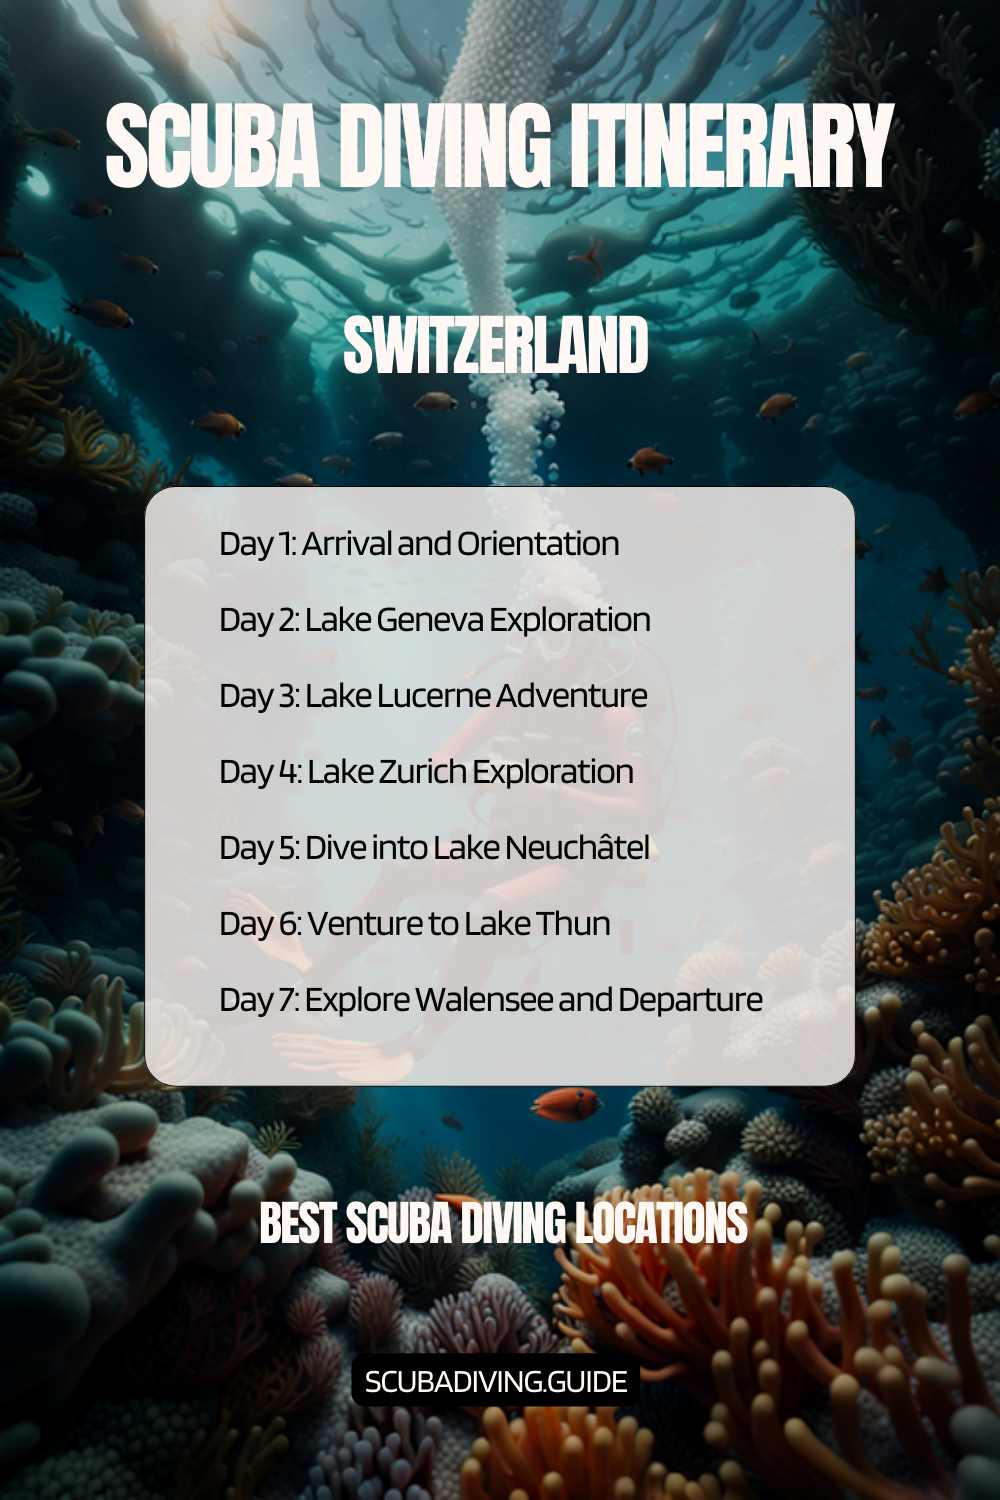 Switzerland Recommended Scuba Diving Itinerary